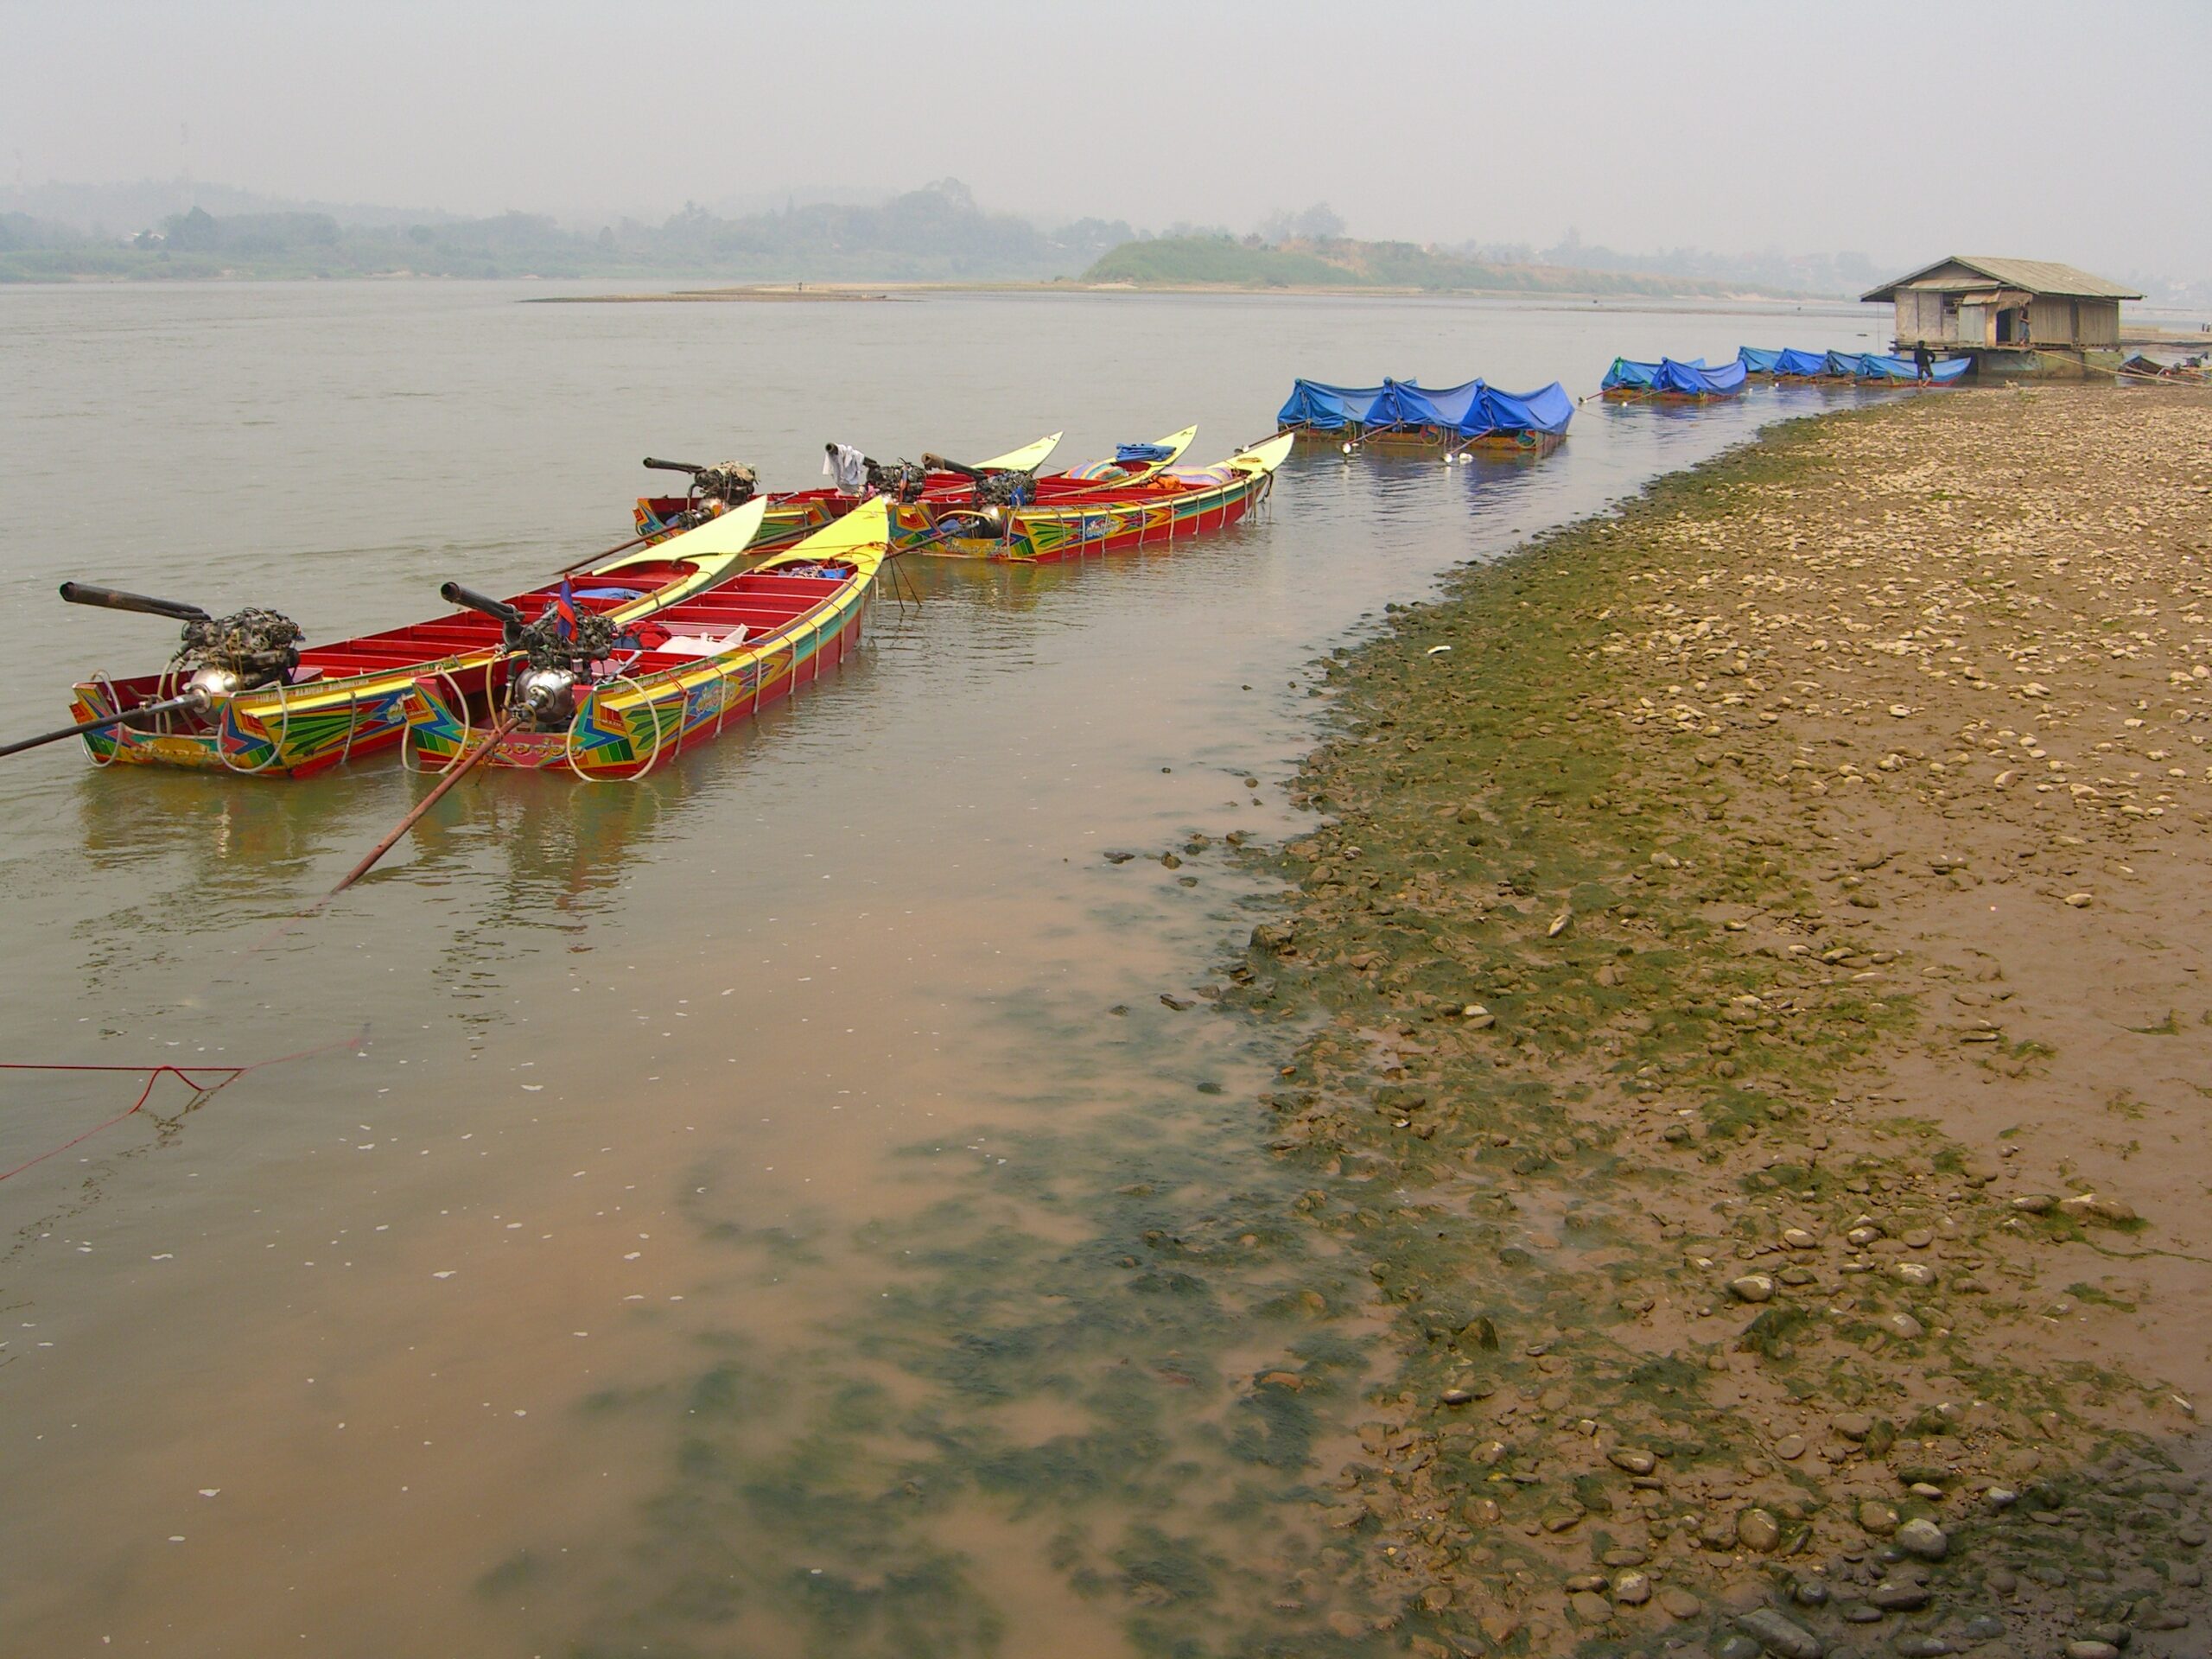 Speed boats on the Mekong River in Huay Xai, Laos